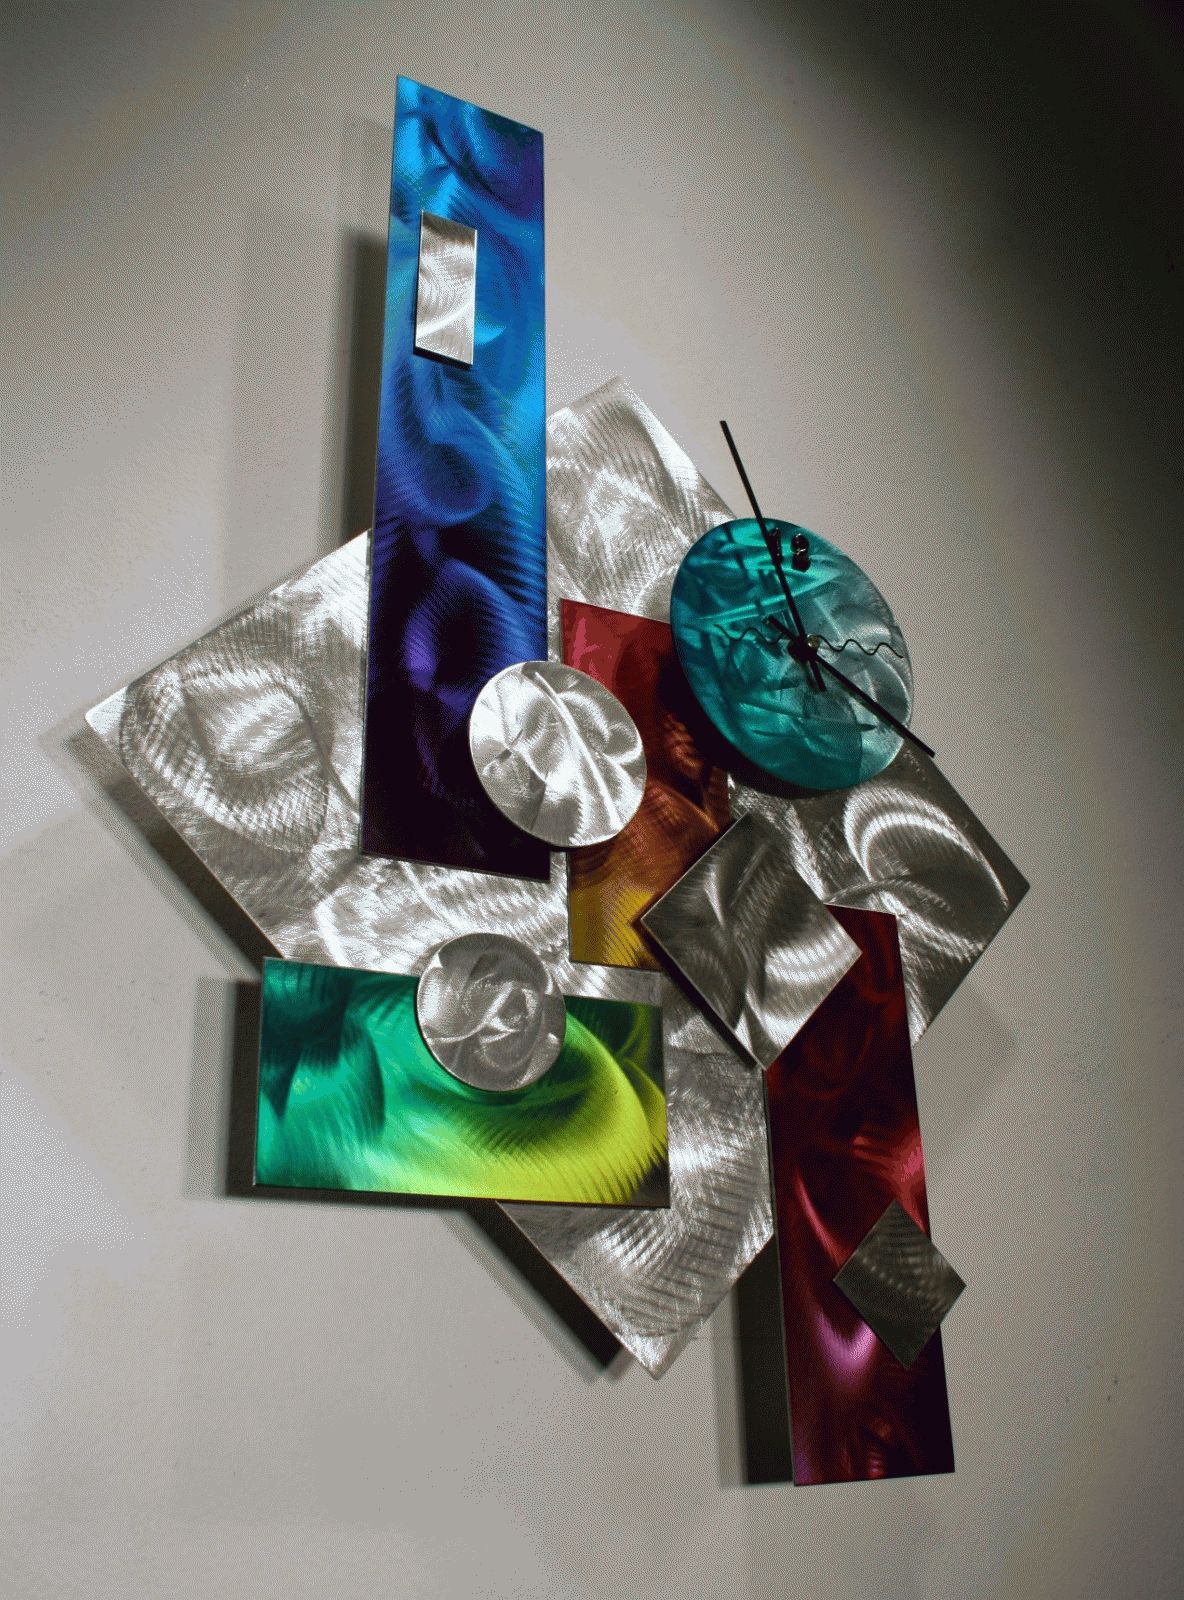 Wilmos Kovacs – Rainbow Art Metal Wall Sculpture Unique Abstract Pertaining To 2017 Unique Metal Wall Art (View 2 of 20)